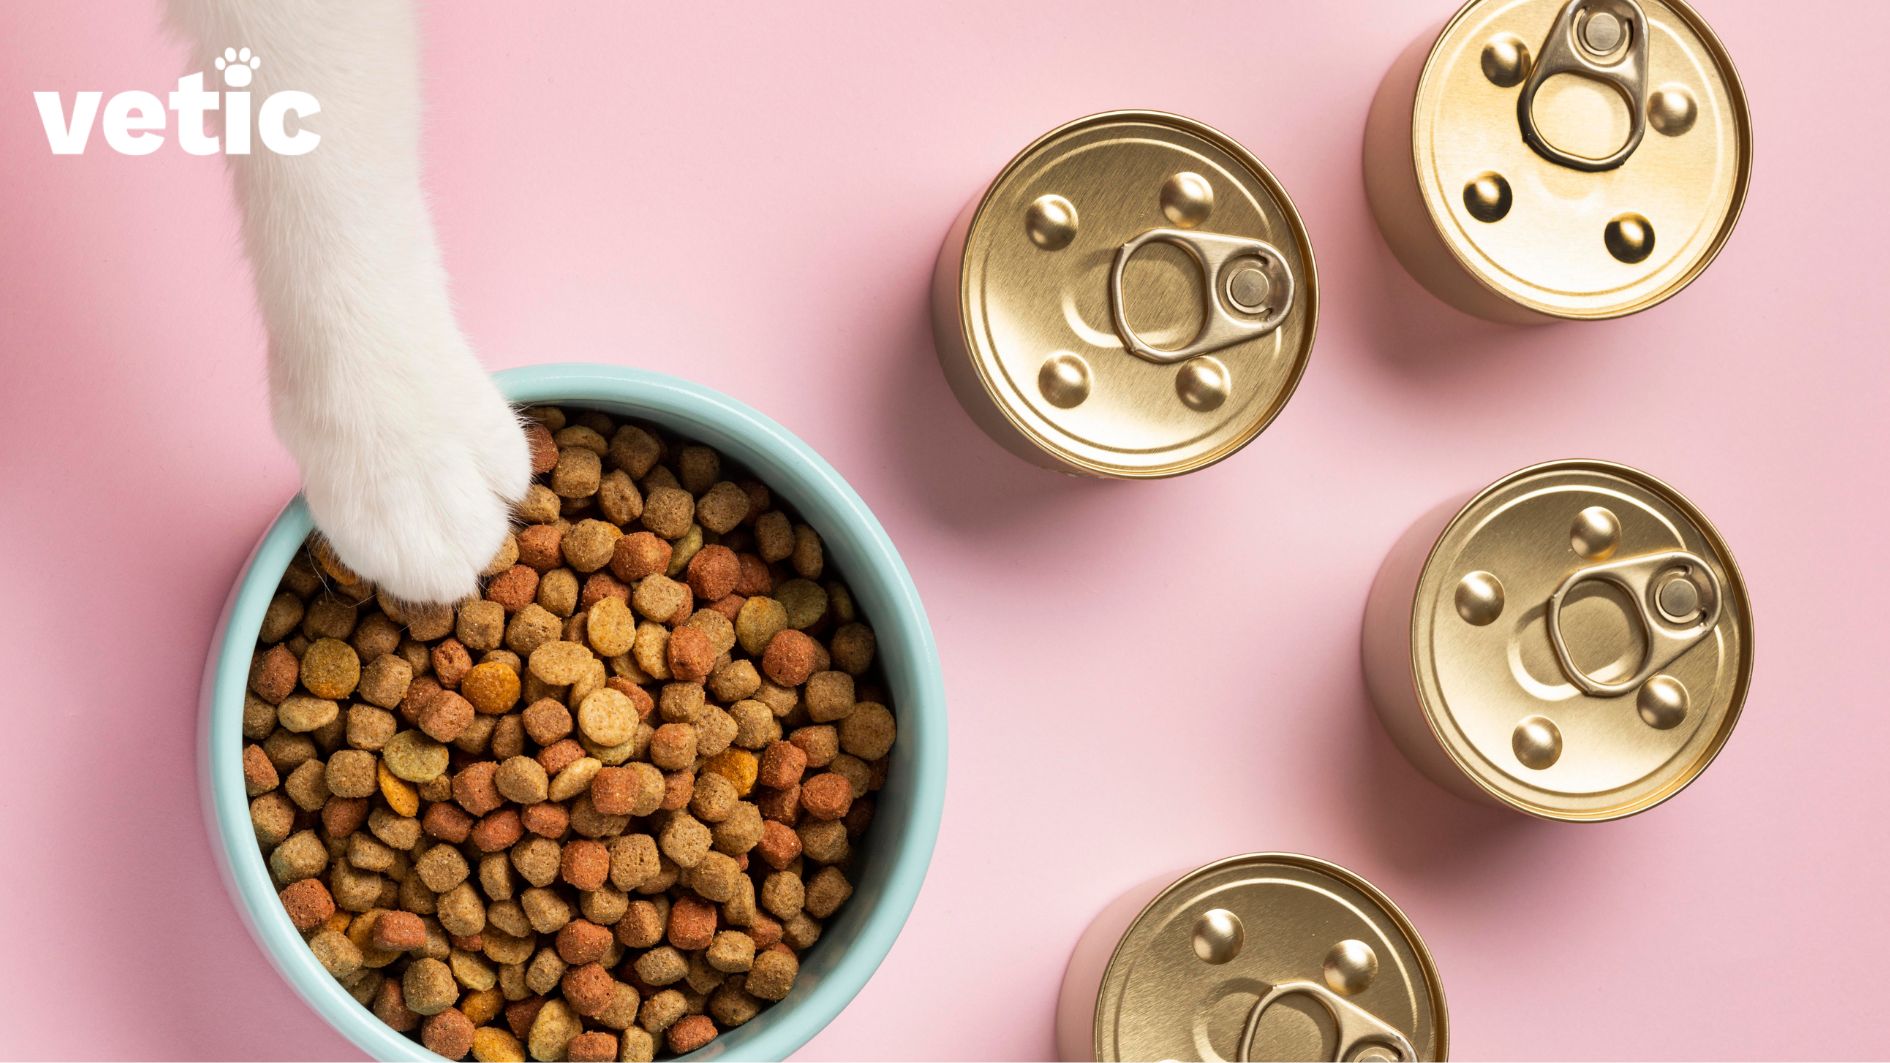 4 sealed cans of wet cat food and one blue bowl filled with dry kitty kibbles are kept against a pink background. the bowl is on the left and a kitty's white paw is visible reaching for the dry cat food in the bowl.